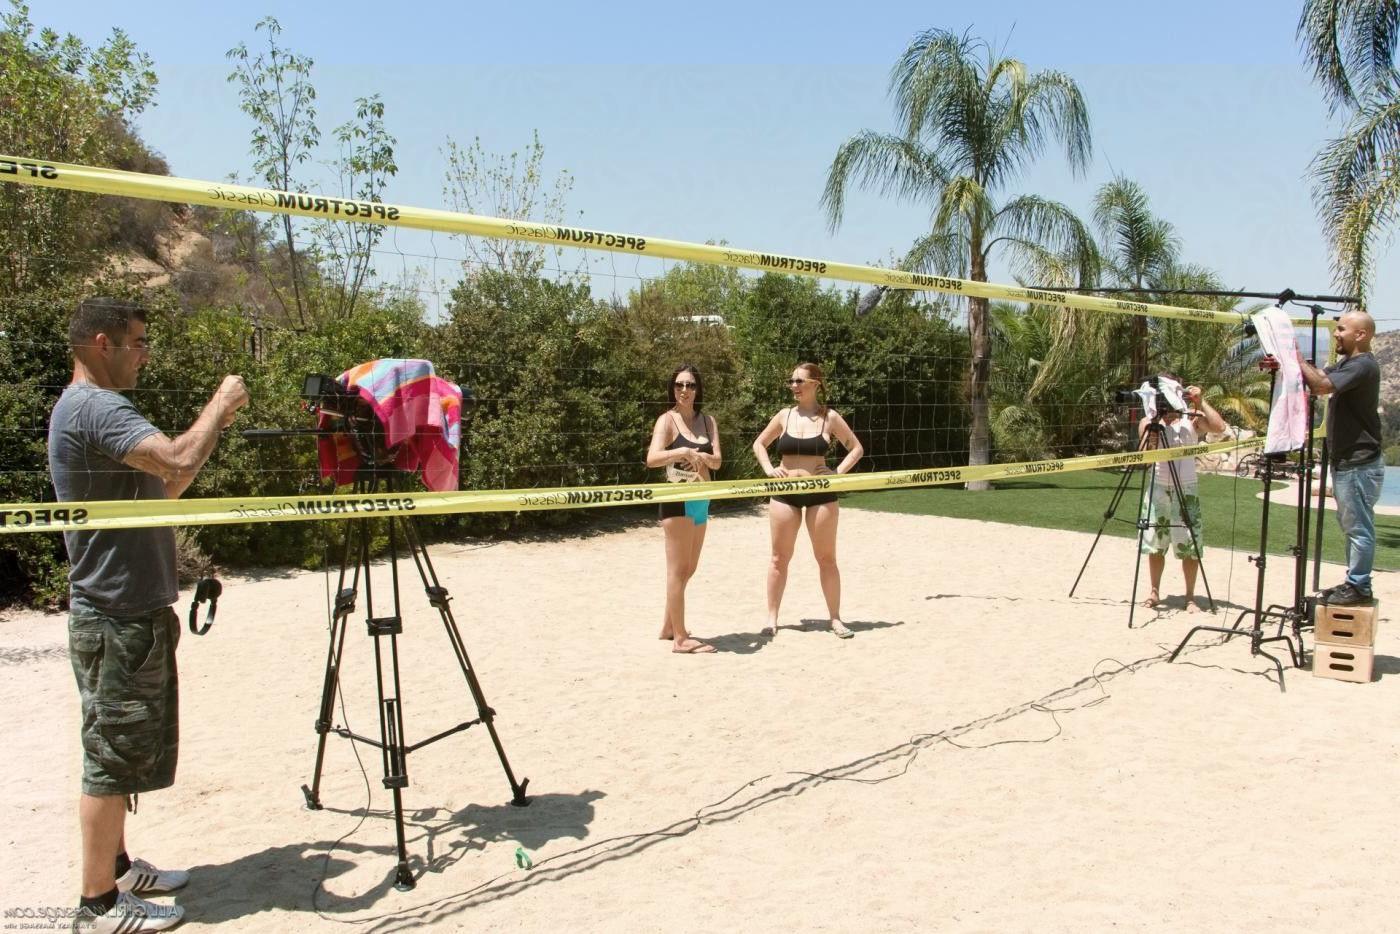 Jelena Jensen and Siri were enjoying a beautiful day in the sun on the volleyball court! Photo